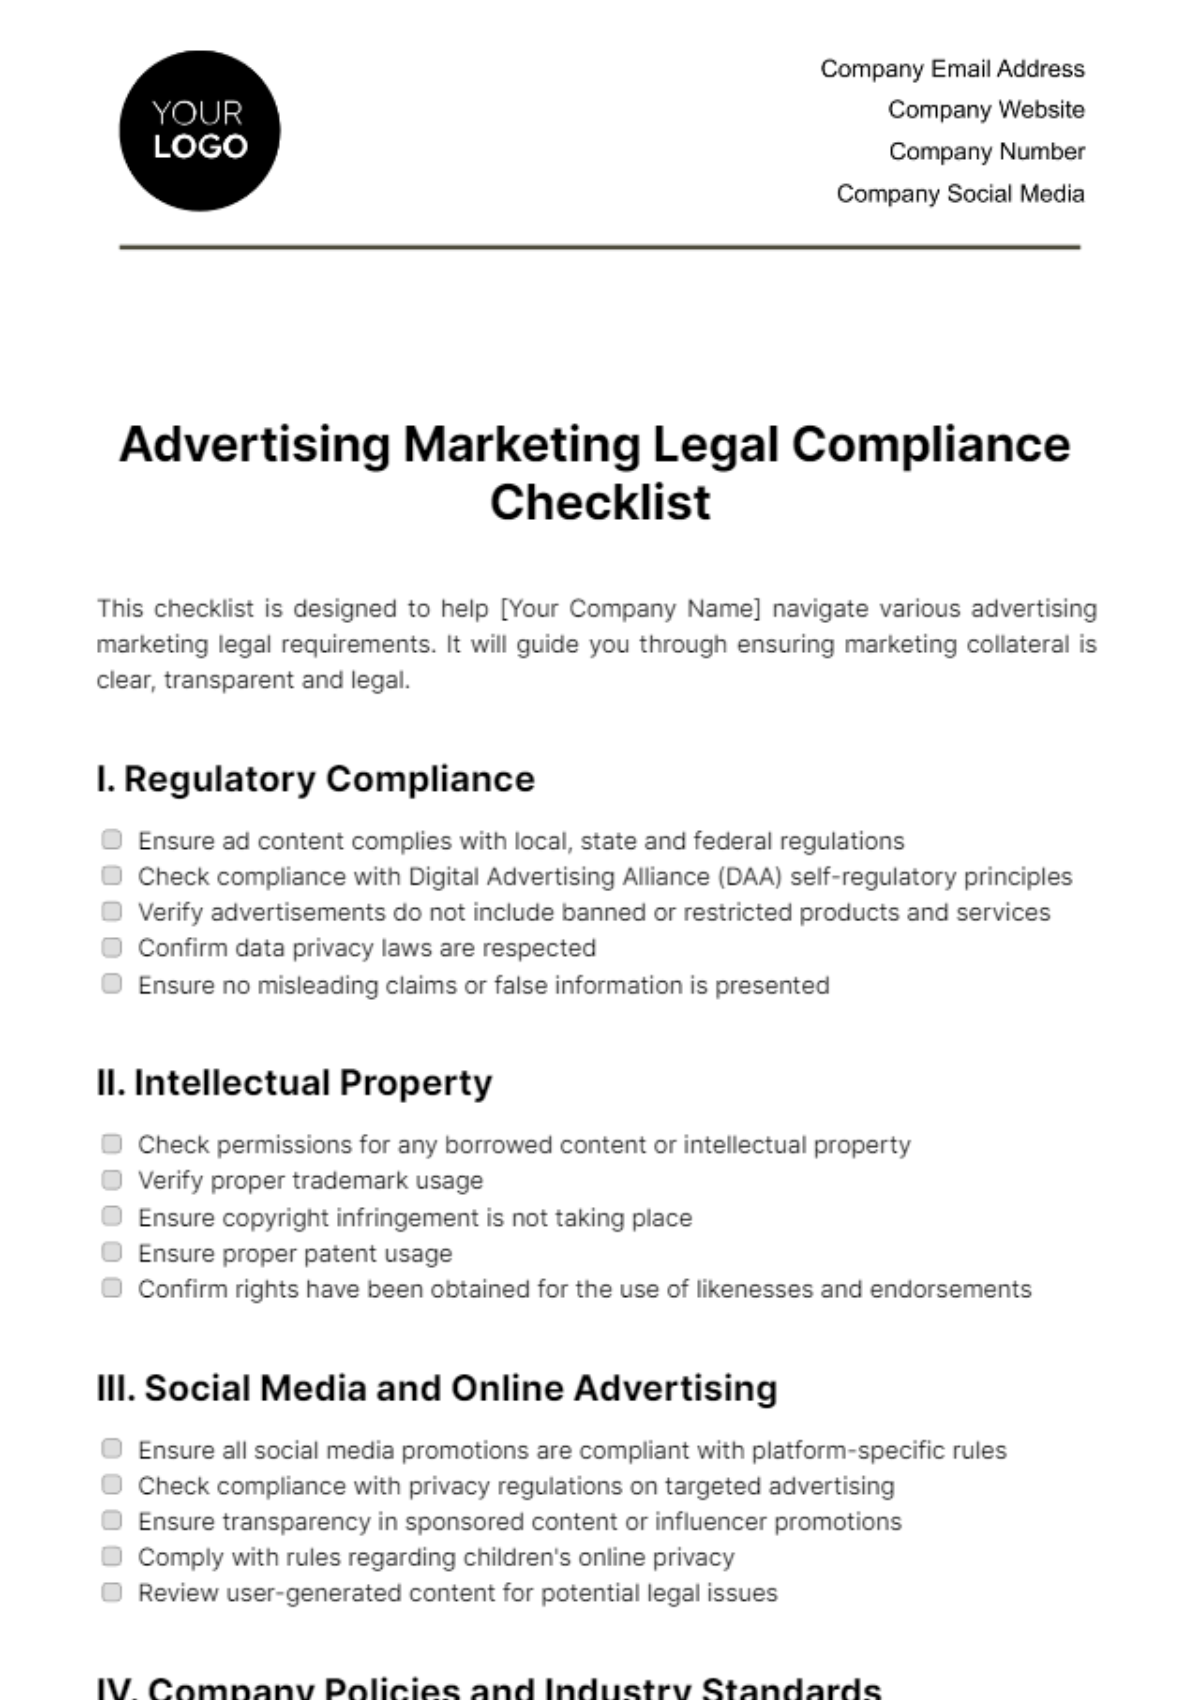 Free Advertising Marketing Legal Compliance Checklist Template